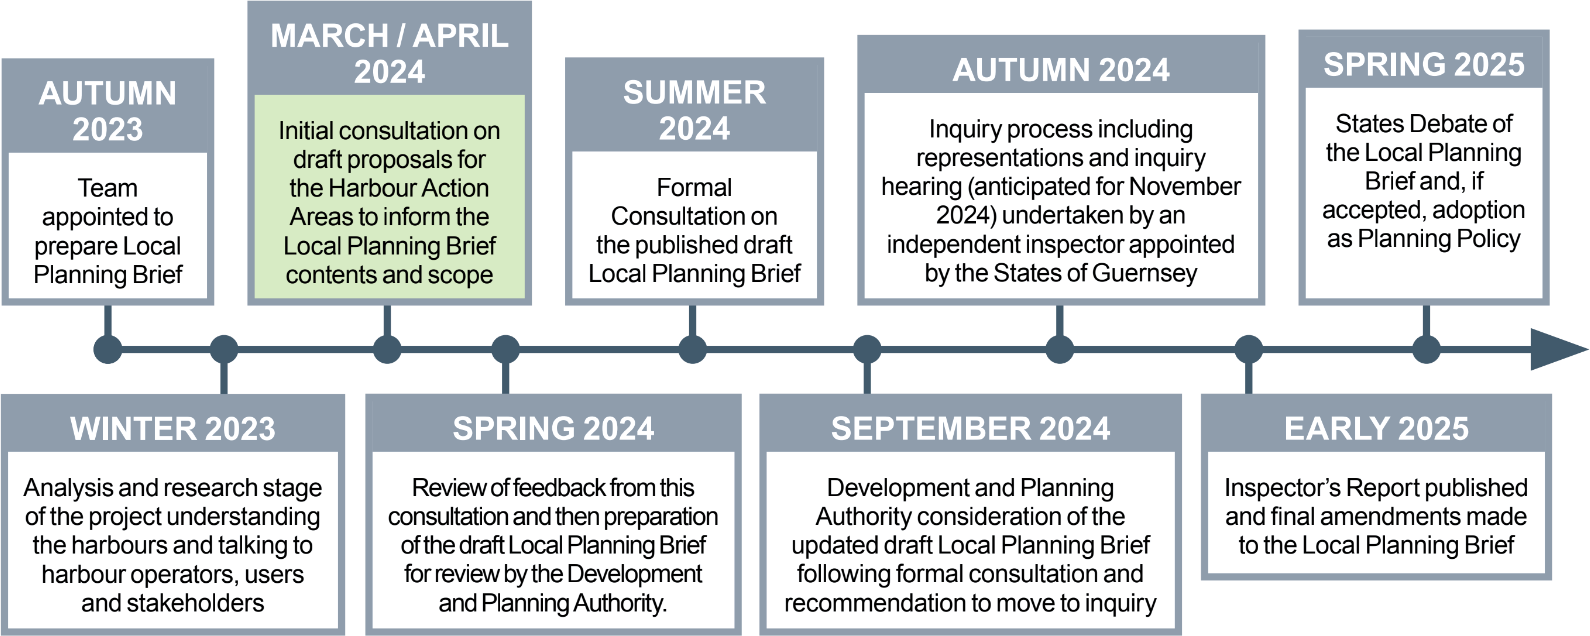 Timeline for adoption of the Harbour Action Areas Local Planning Brief